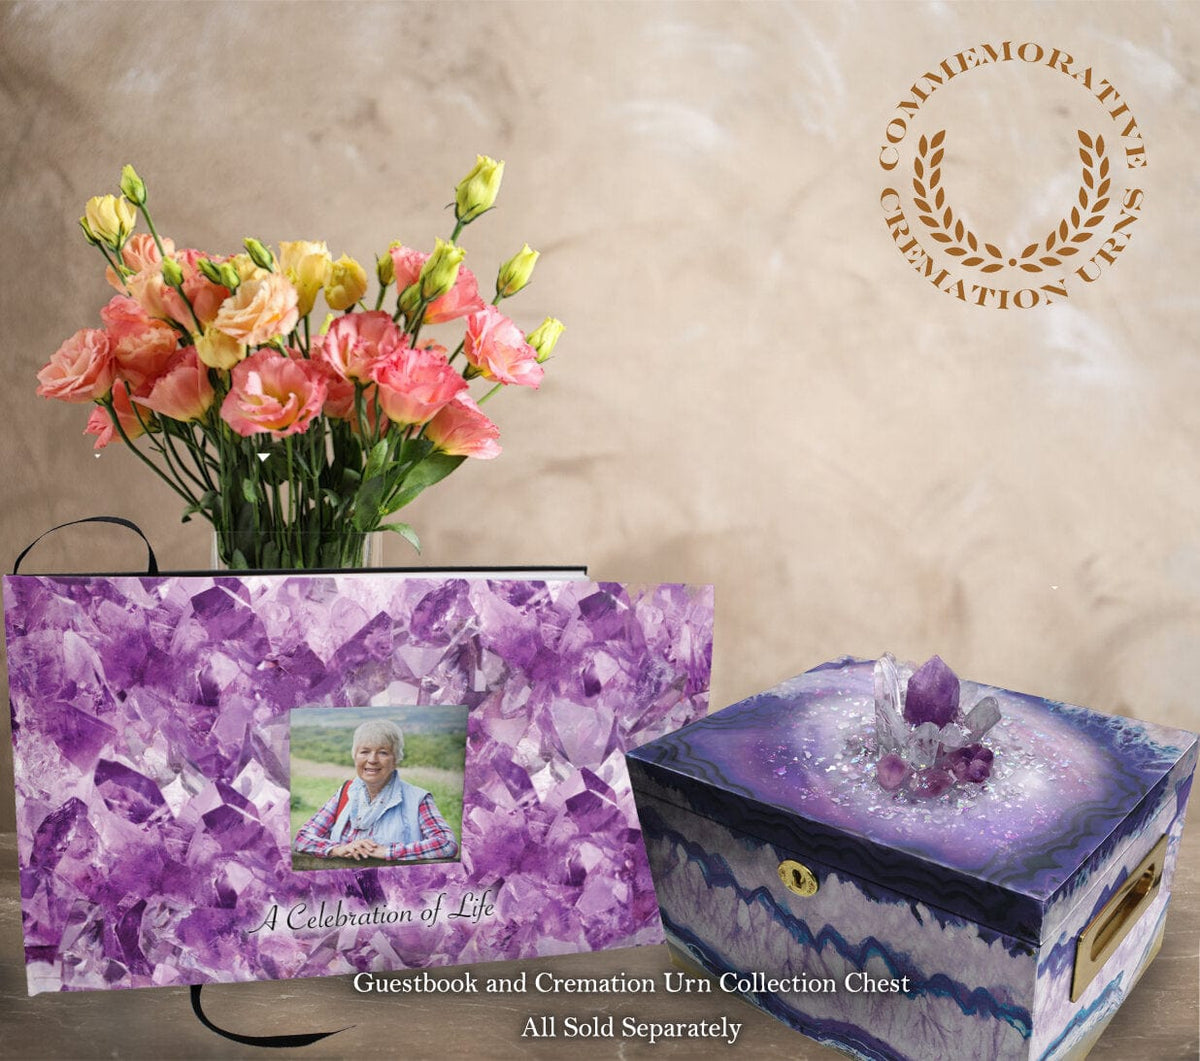 Commemorative Cremation Urns Amethyst Crystals Matching Themed &#39;Celebration of Life&#39; Guest Book for Funeral or Memorial Service